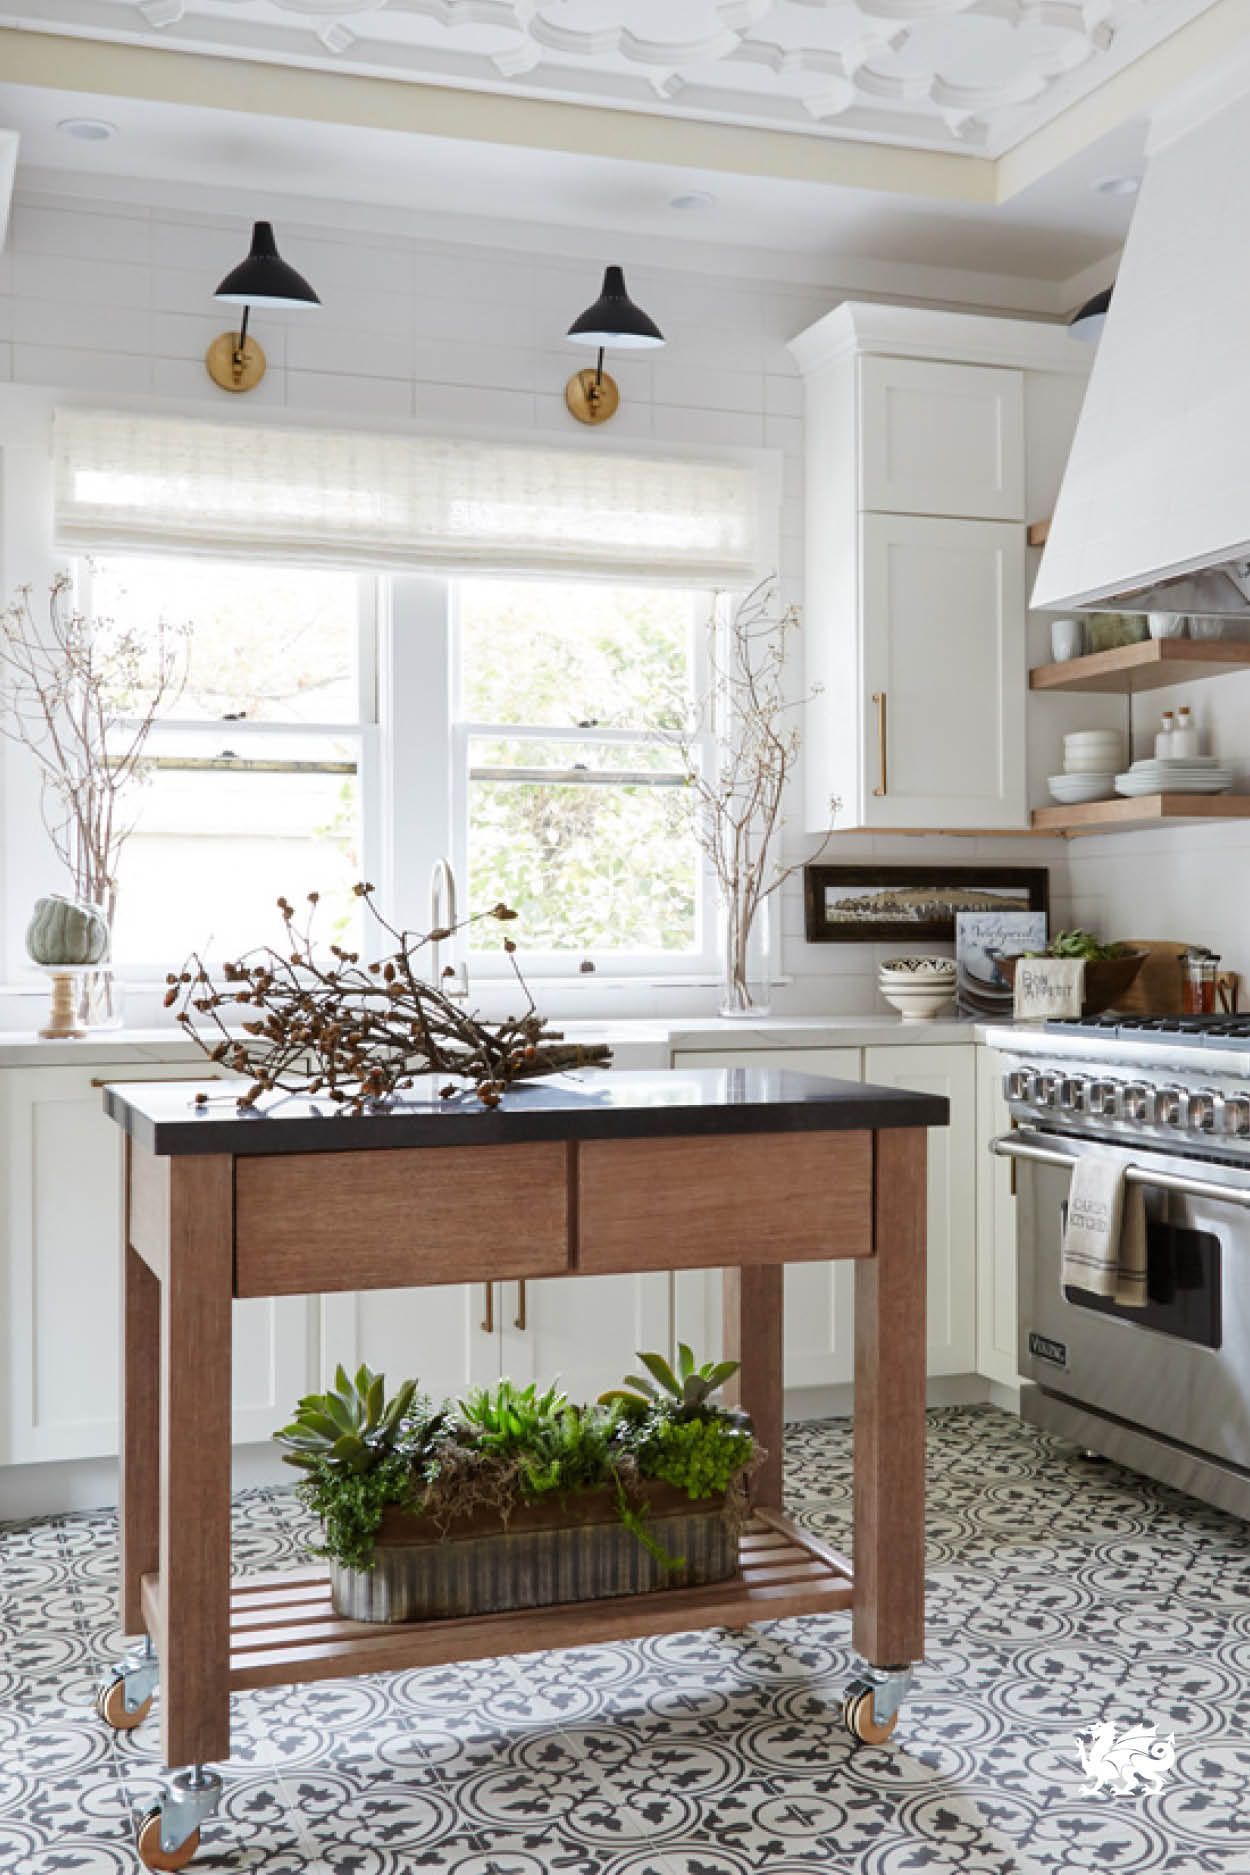 Make the most of a kitchen by adding a rolling kitchen cart, open shelving, and…